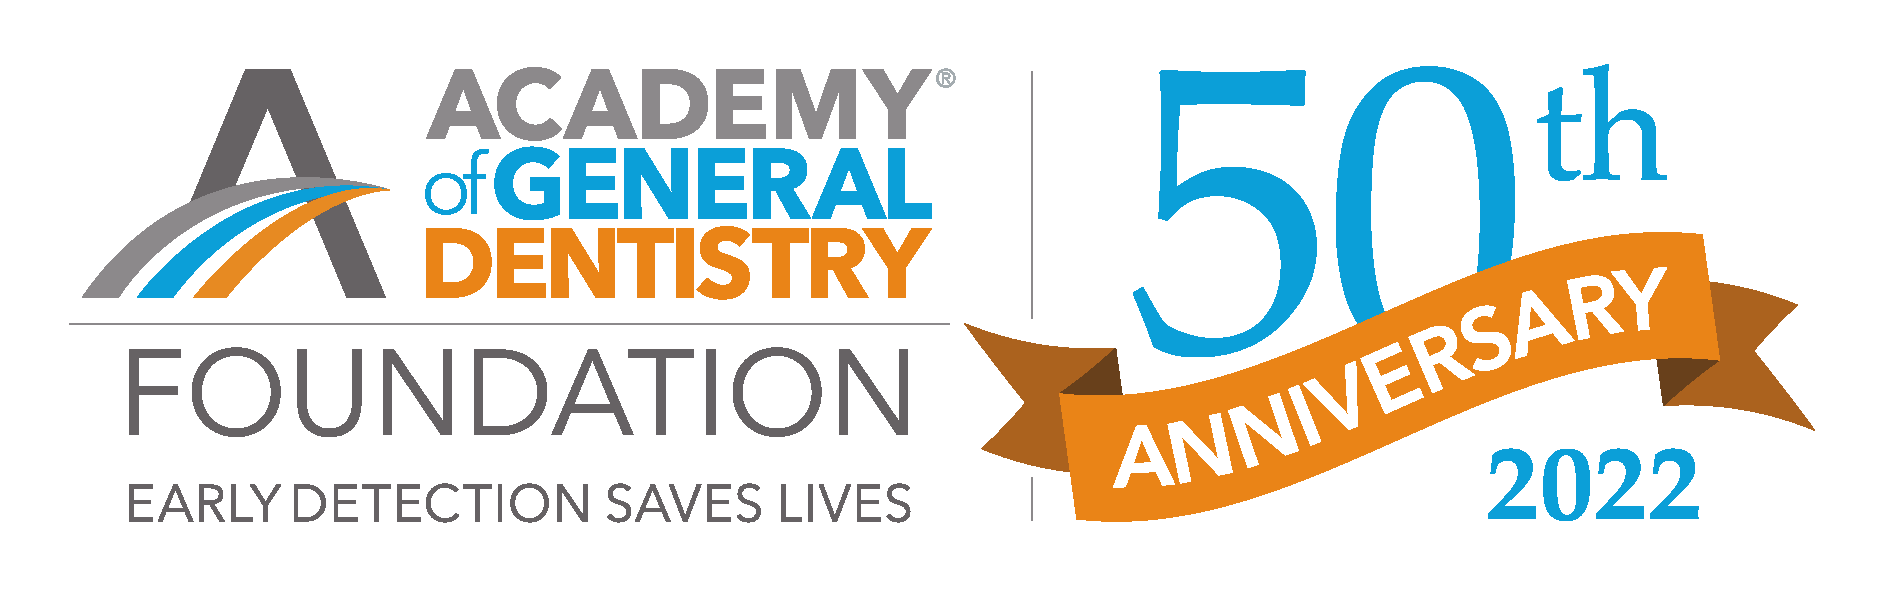 Academy of General Dentistry 